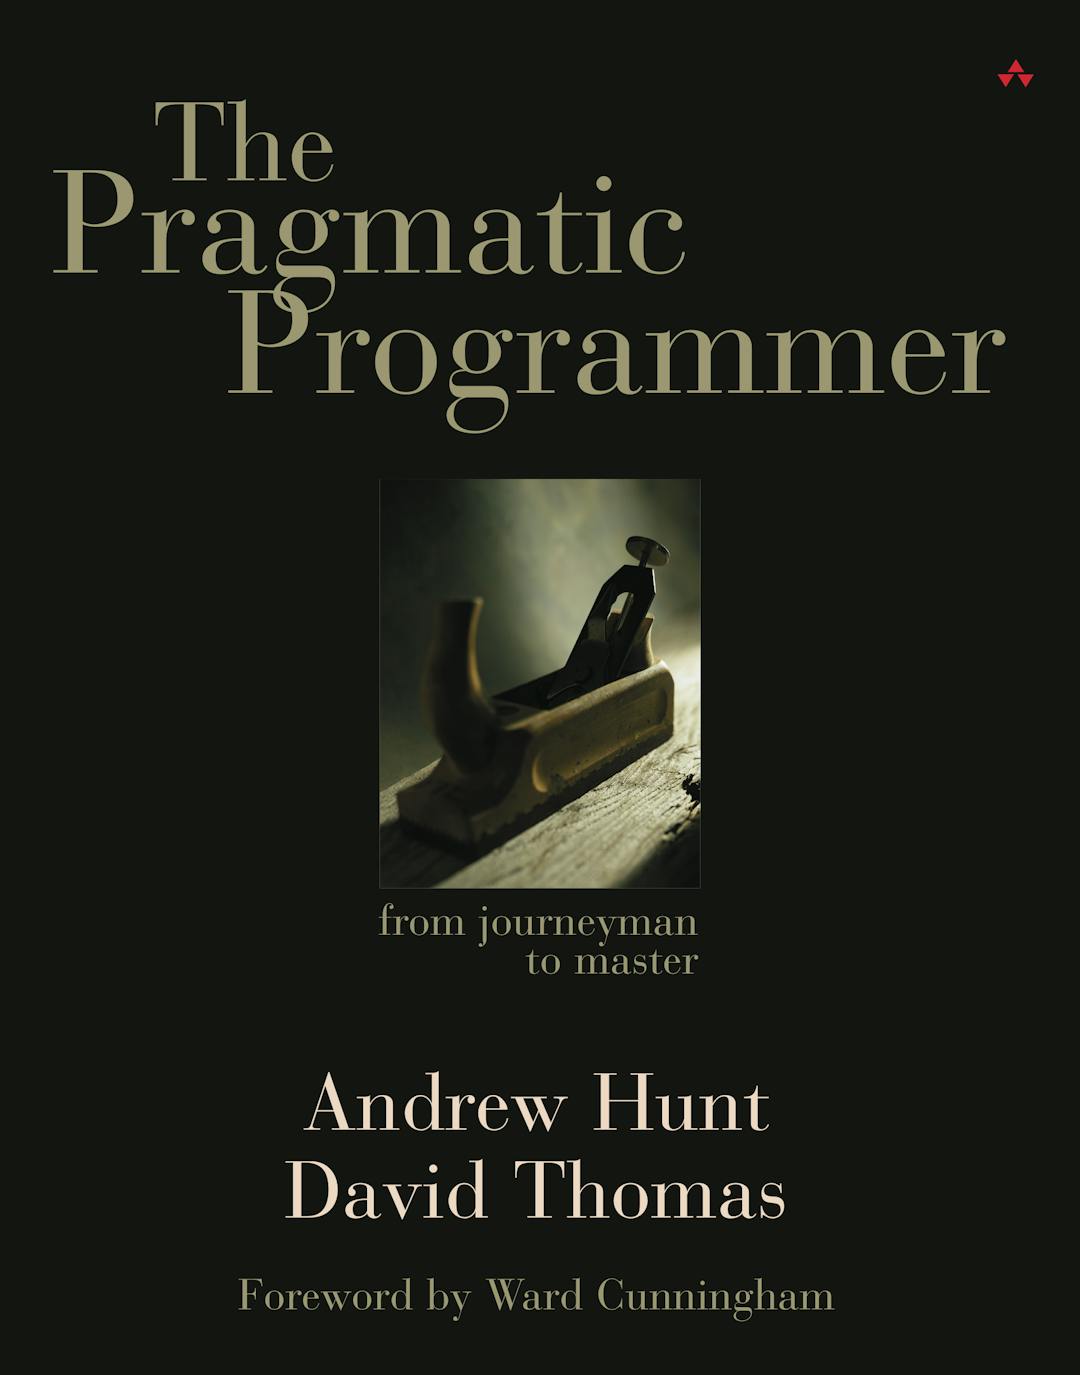 The Pragmatic Programmer: From Journeyman to Master, by Andy Hunt, Dave Thomas